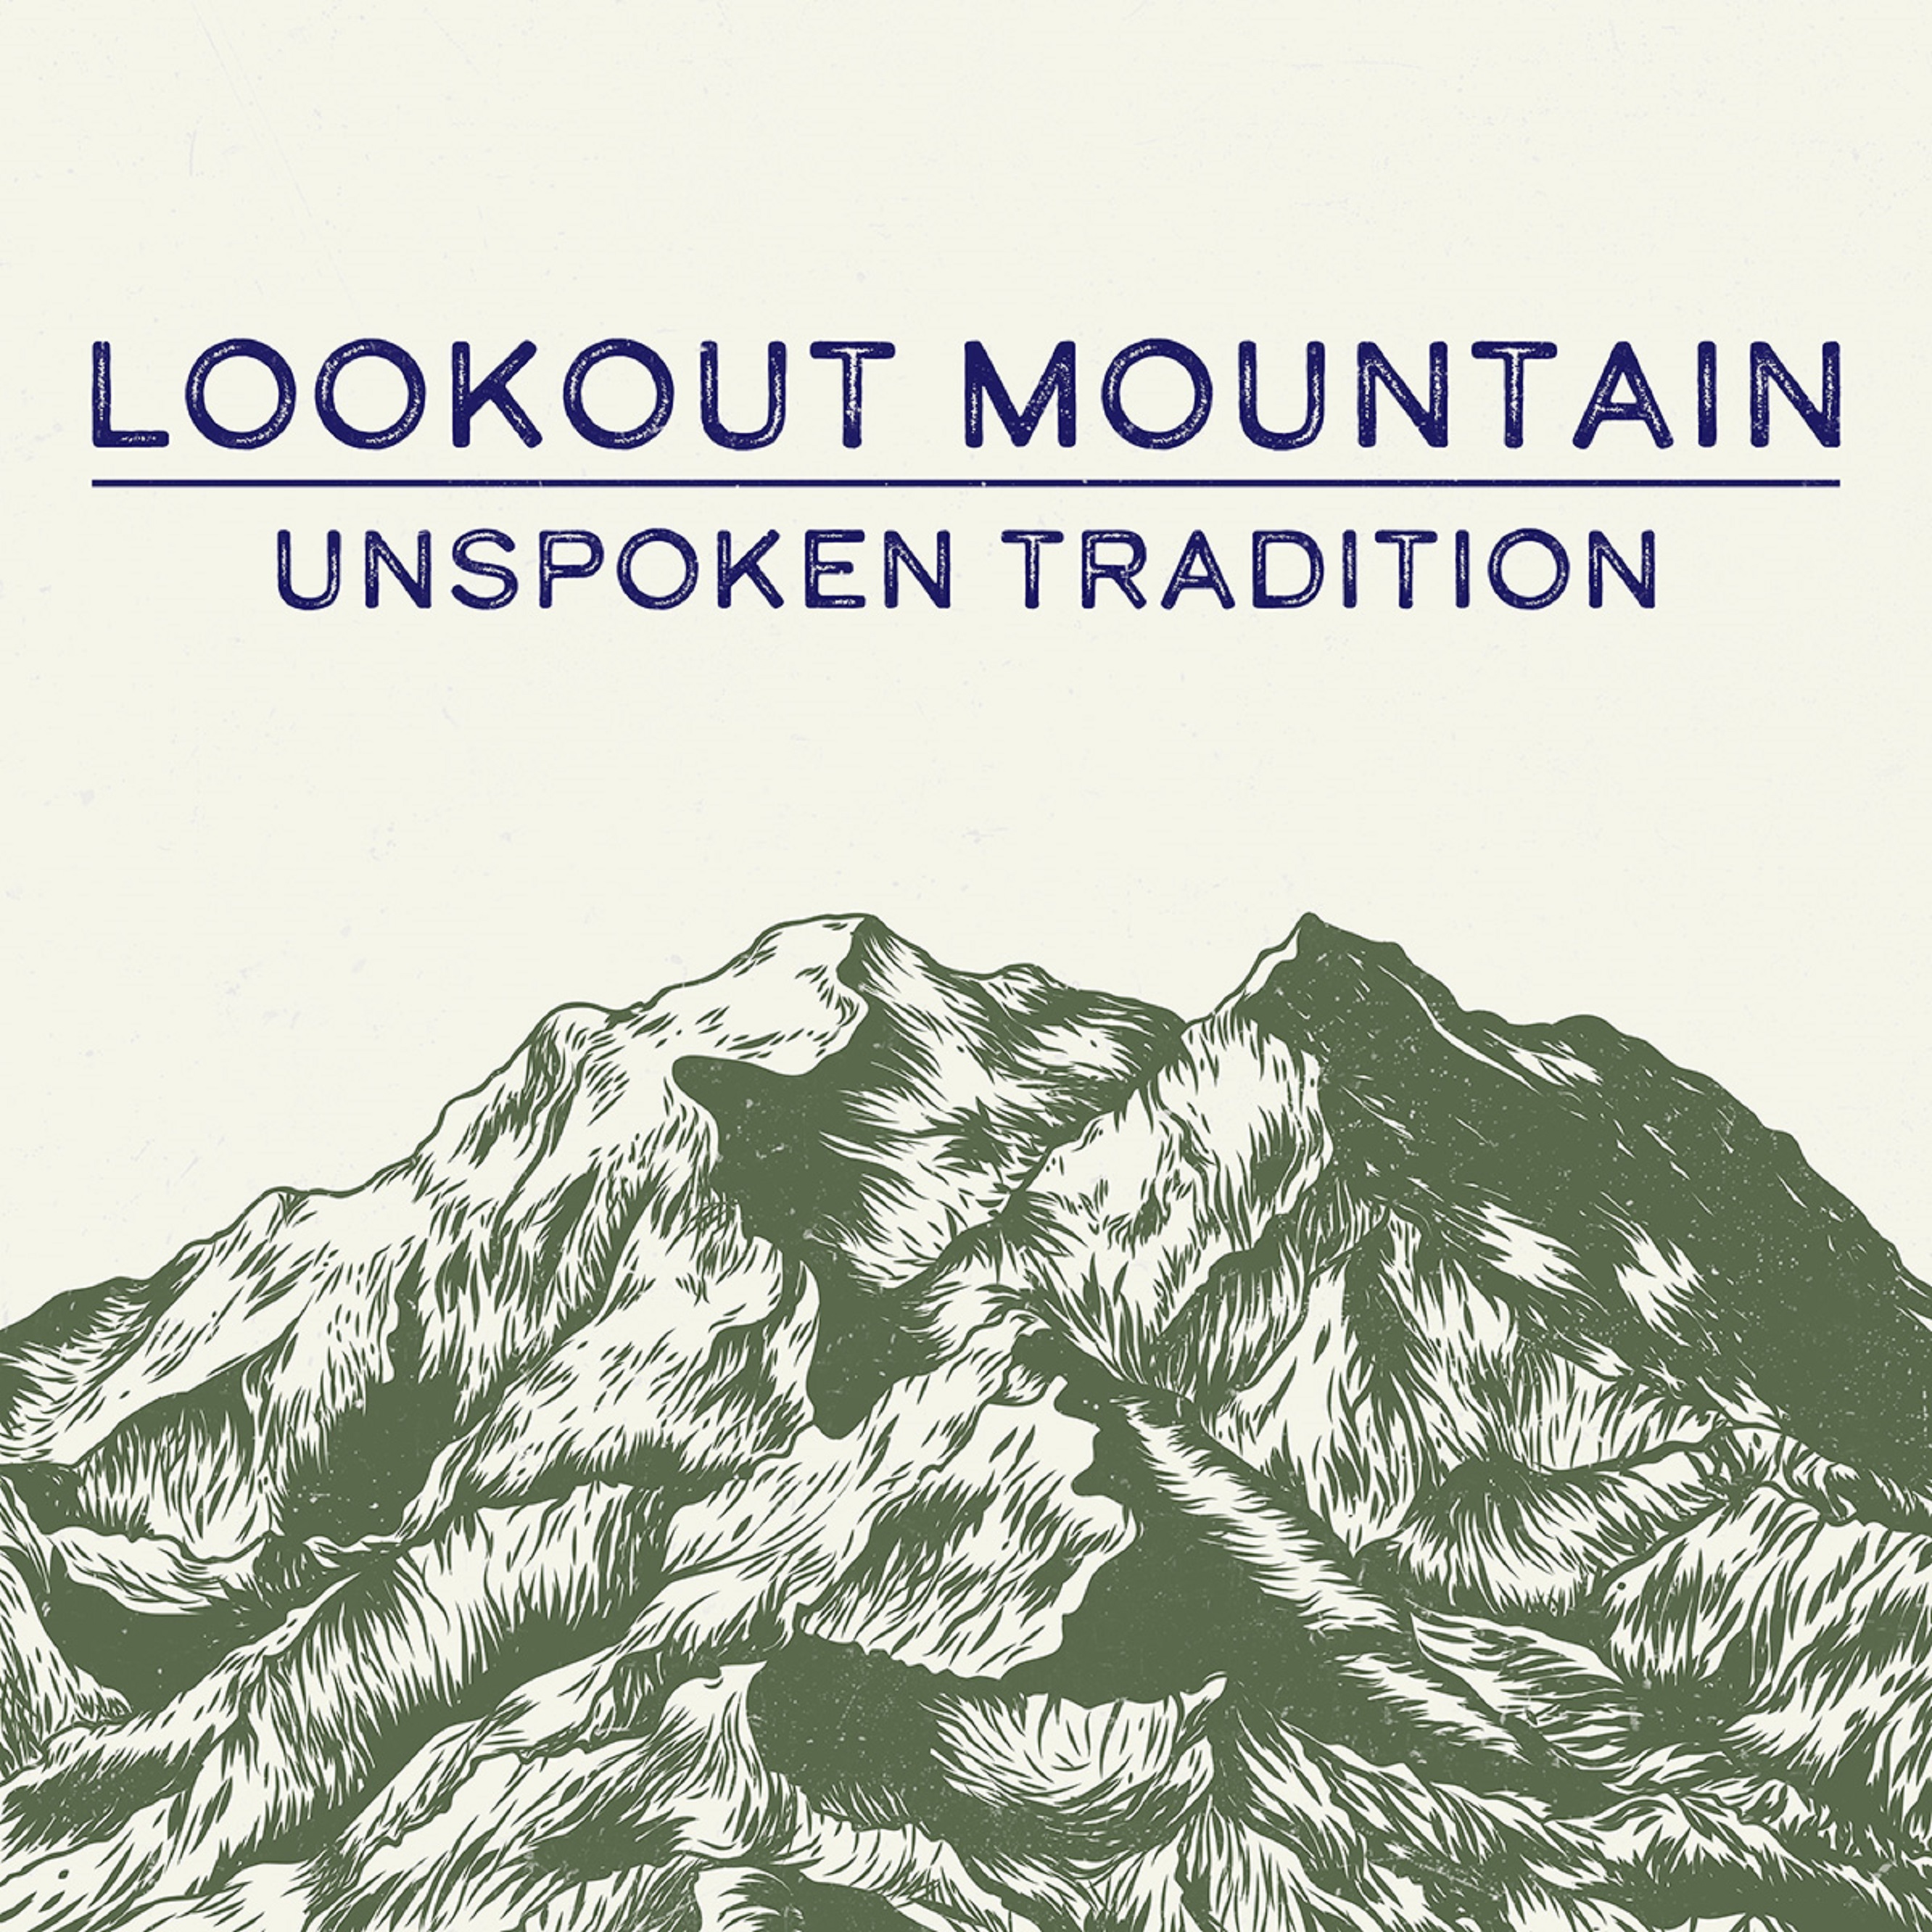 Unspoken Tradition deepens artistry with “Lookout Mountain”